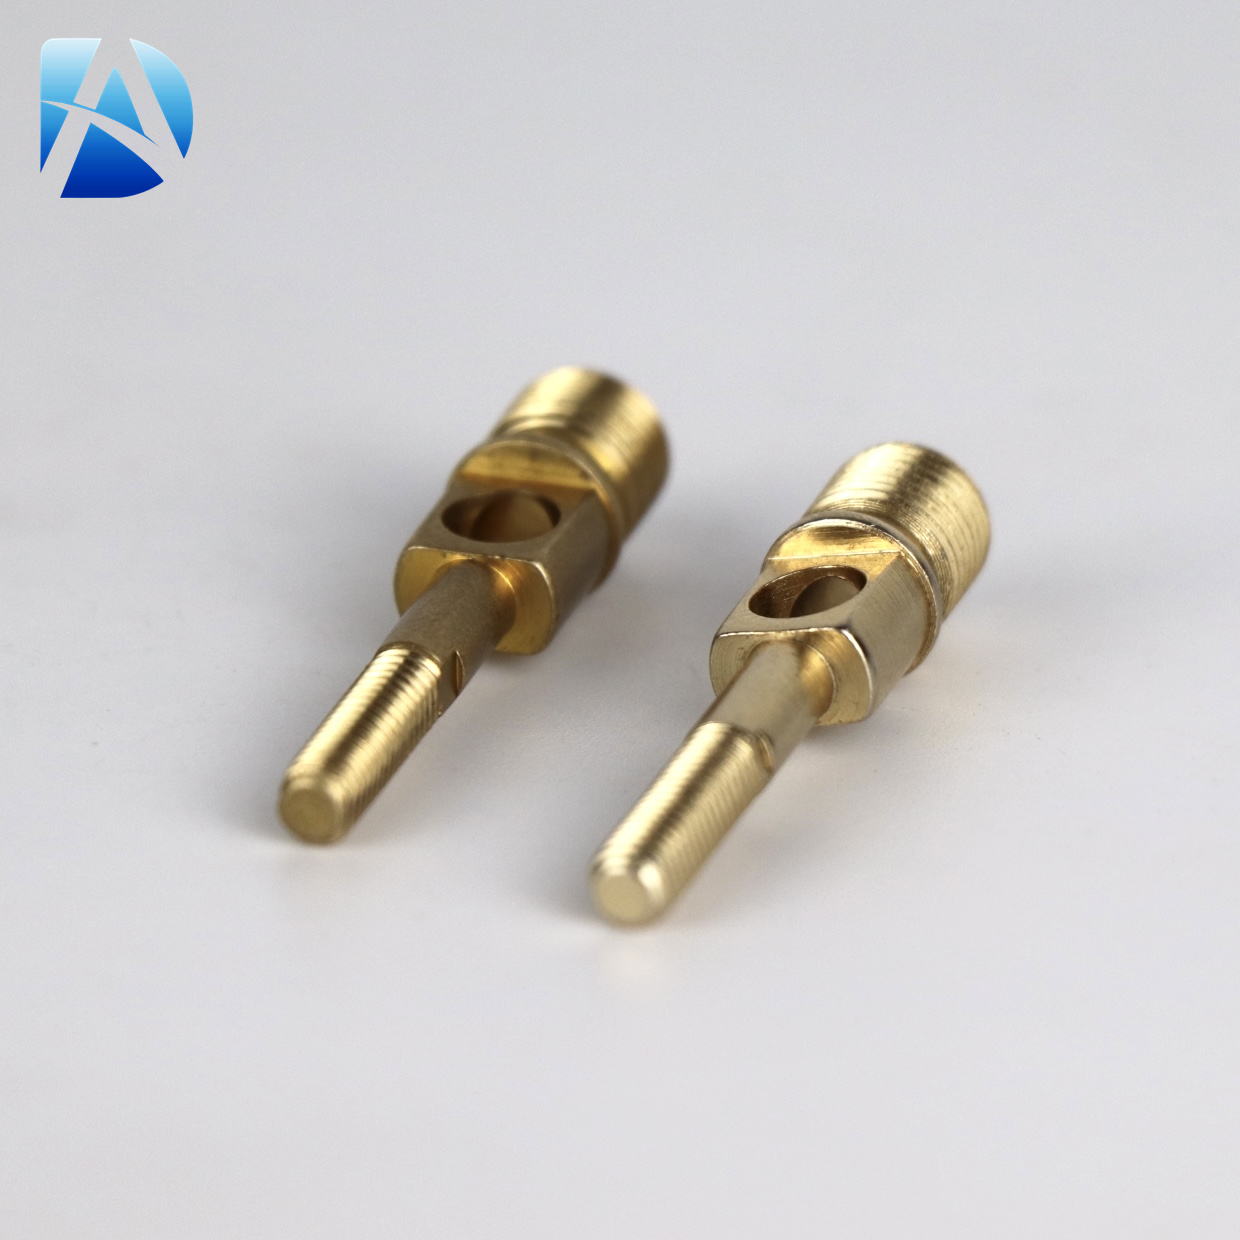 Precision CNC Machined Brass String Ball Head Screw with Threaded Hole for Custom Applications